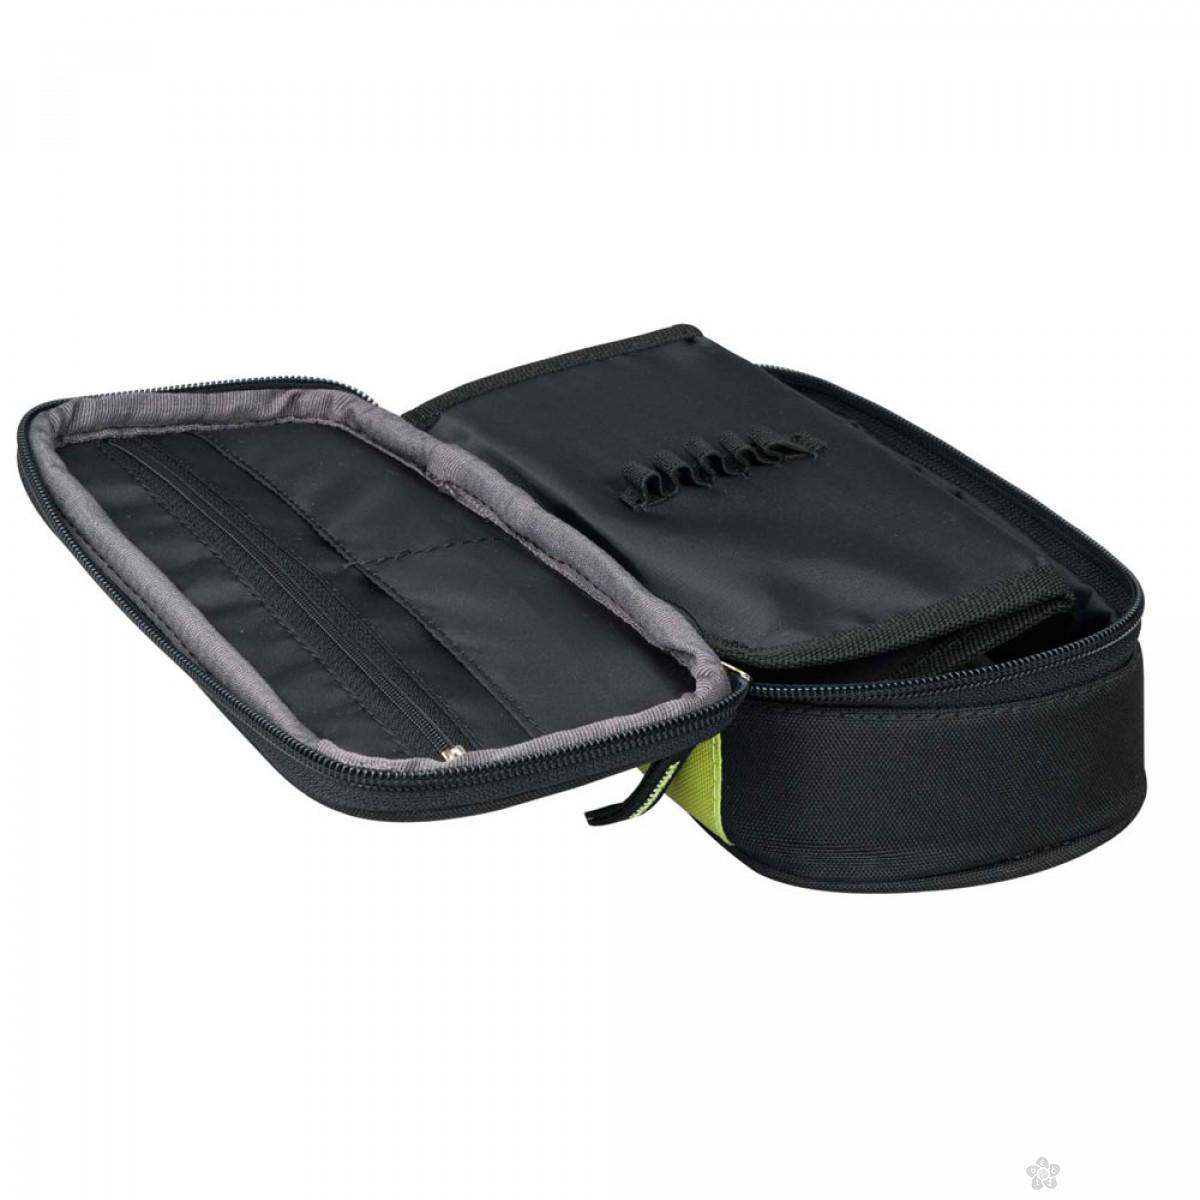 Pernica Compact Black Fluo Black Lime 21290 